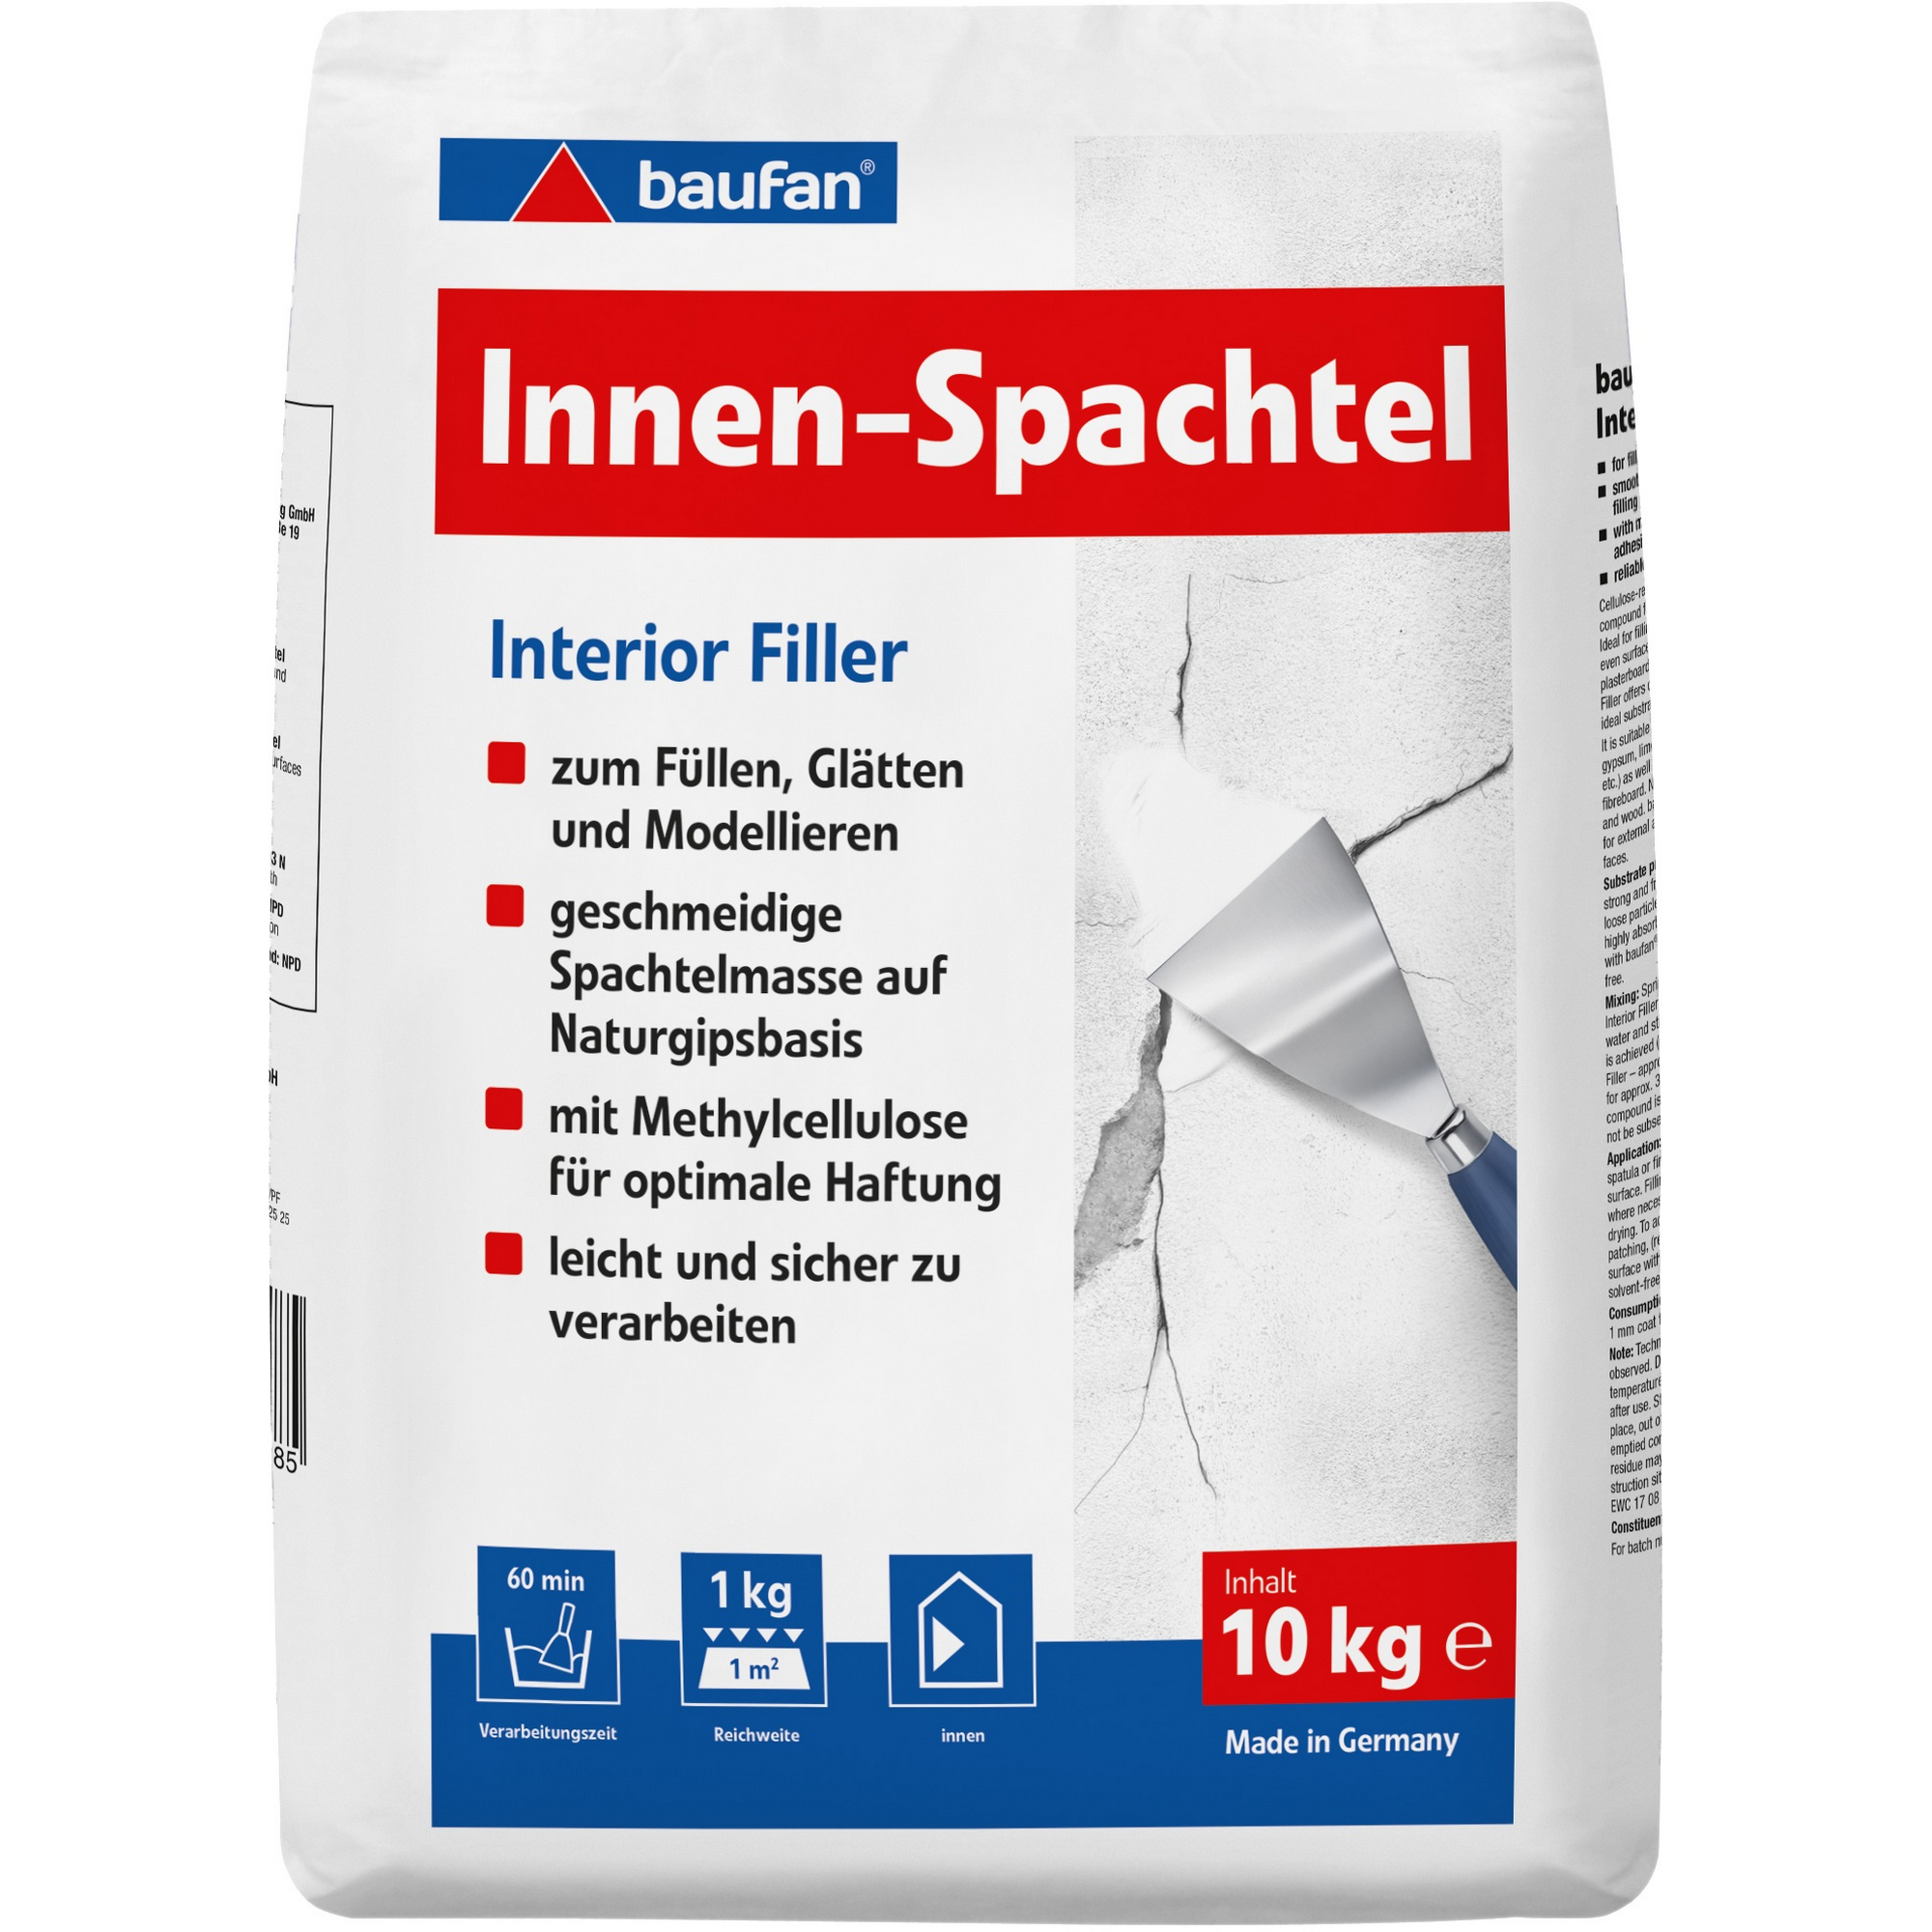 Innenspachtel 10 kg + product picture